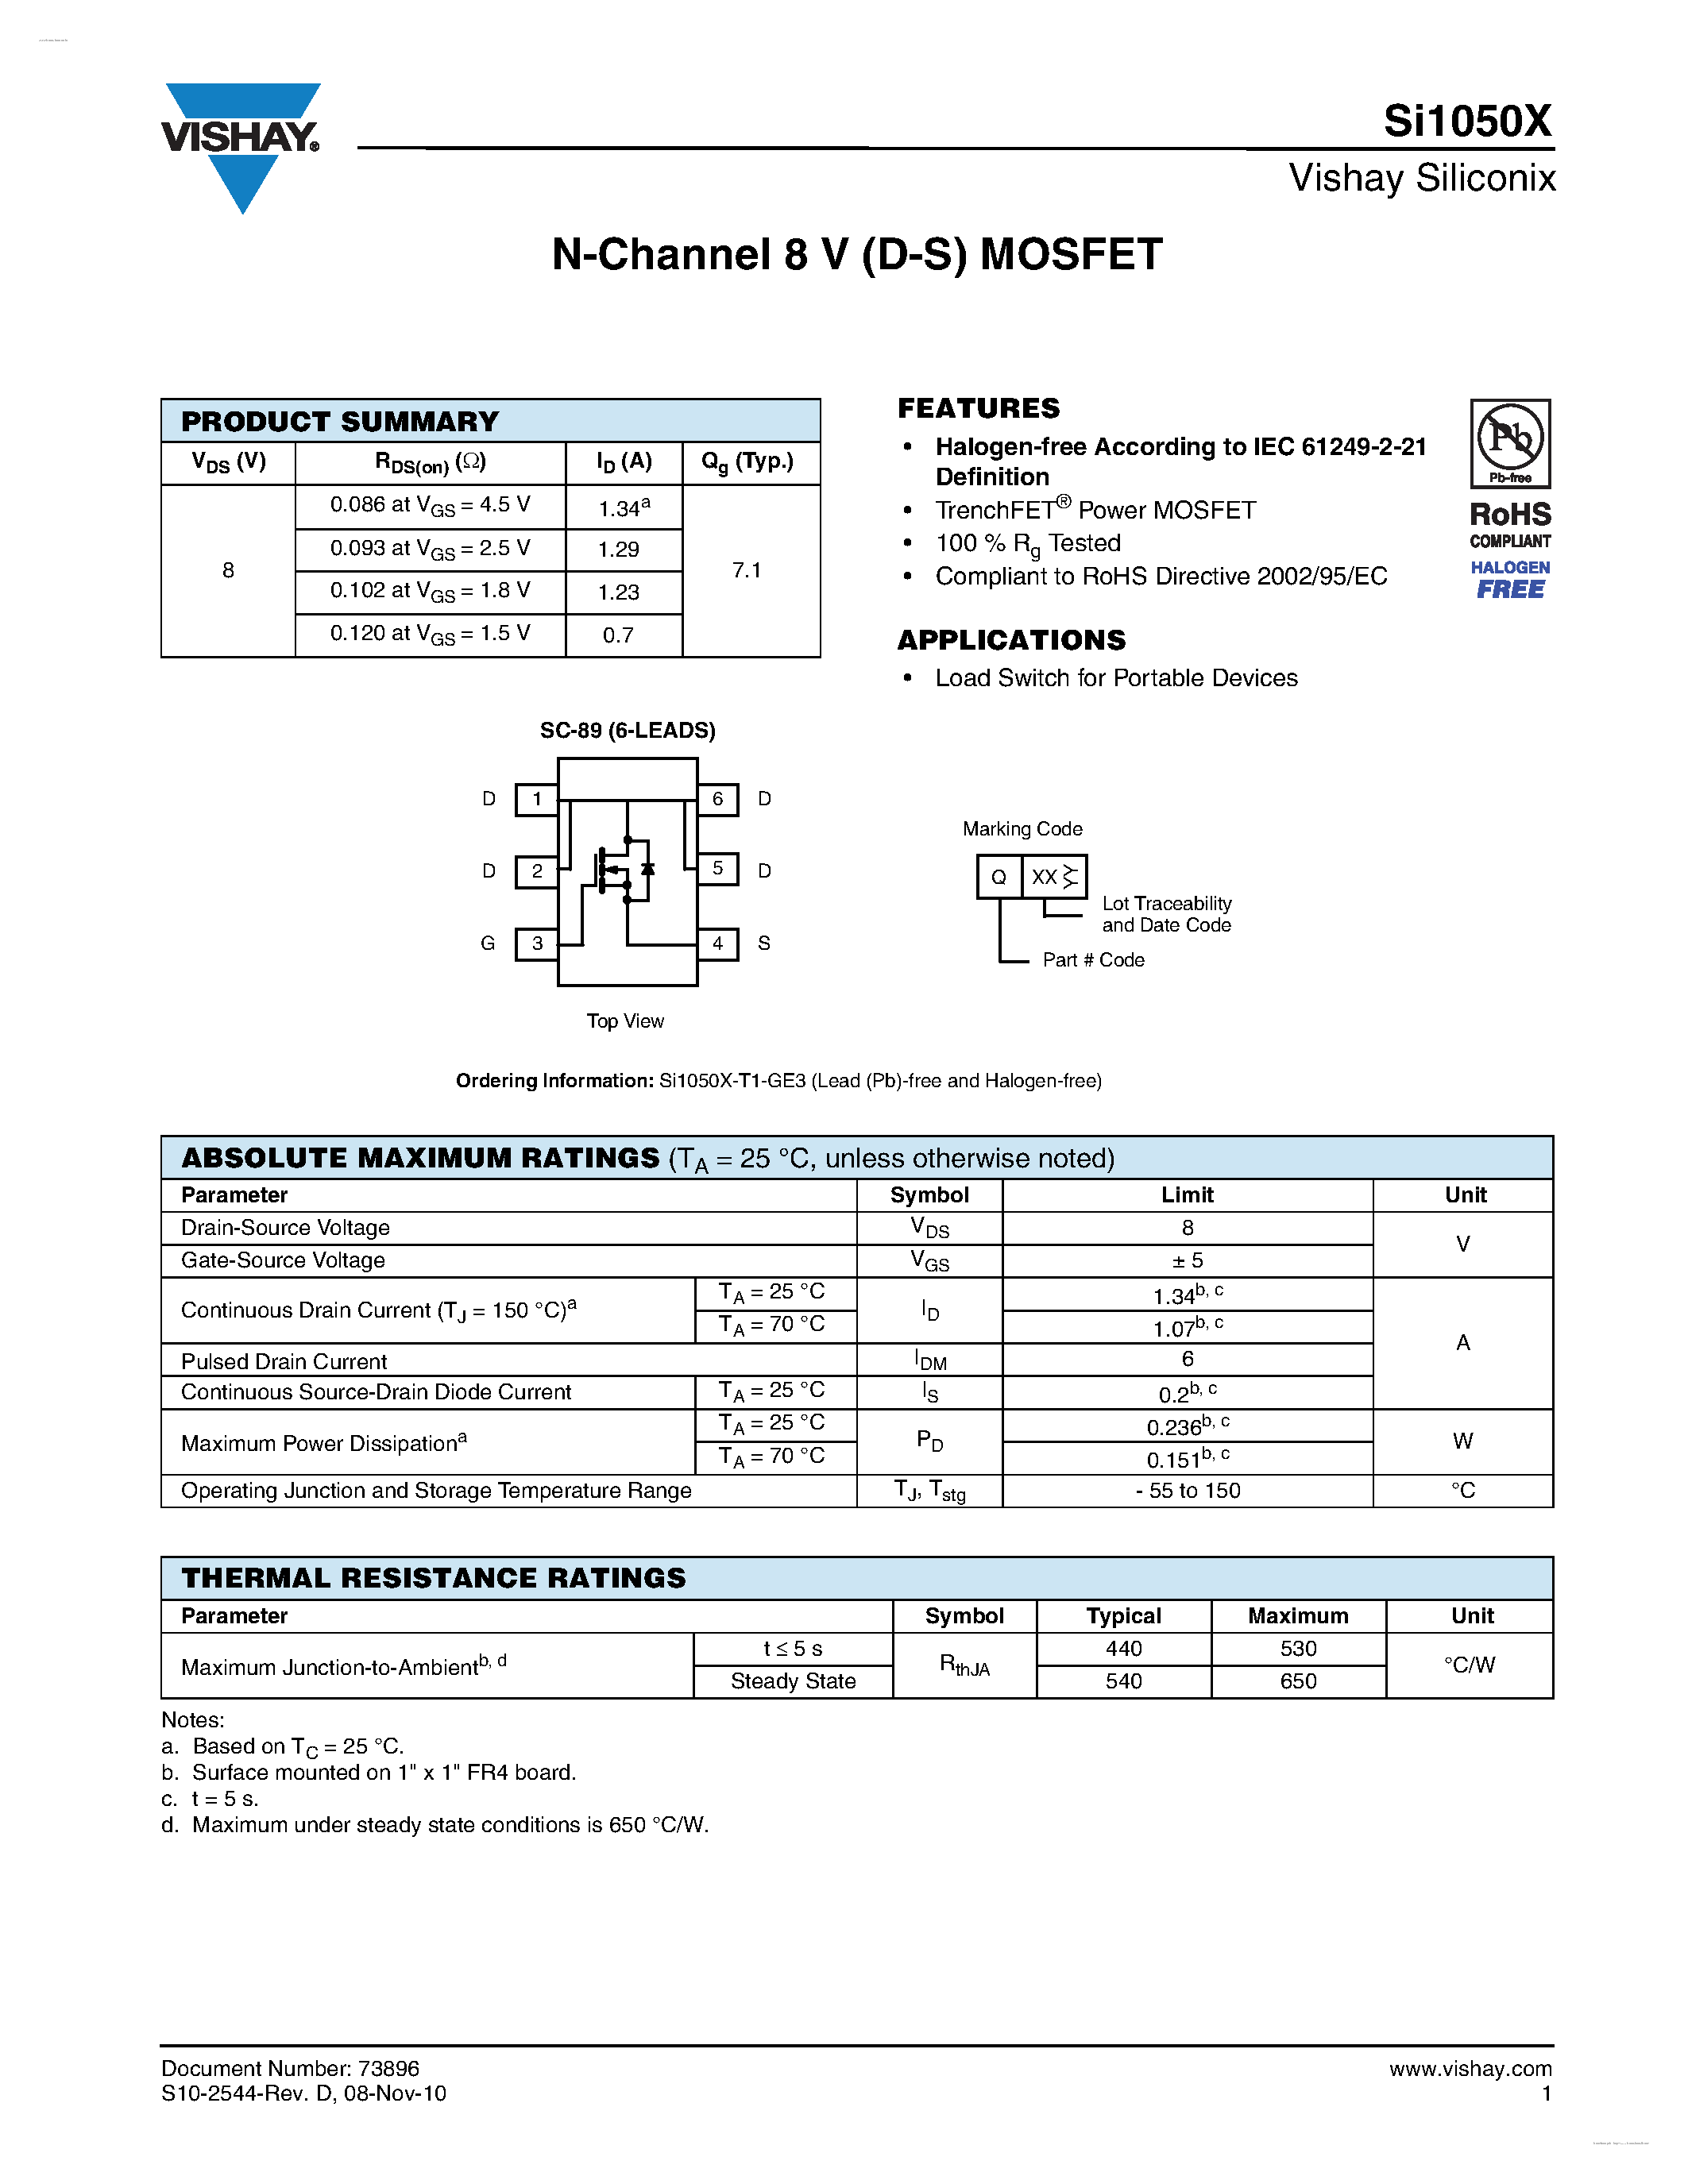 Datasheet SI1050X - N-Channel 8 V (D-S) MOSFET page 1